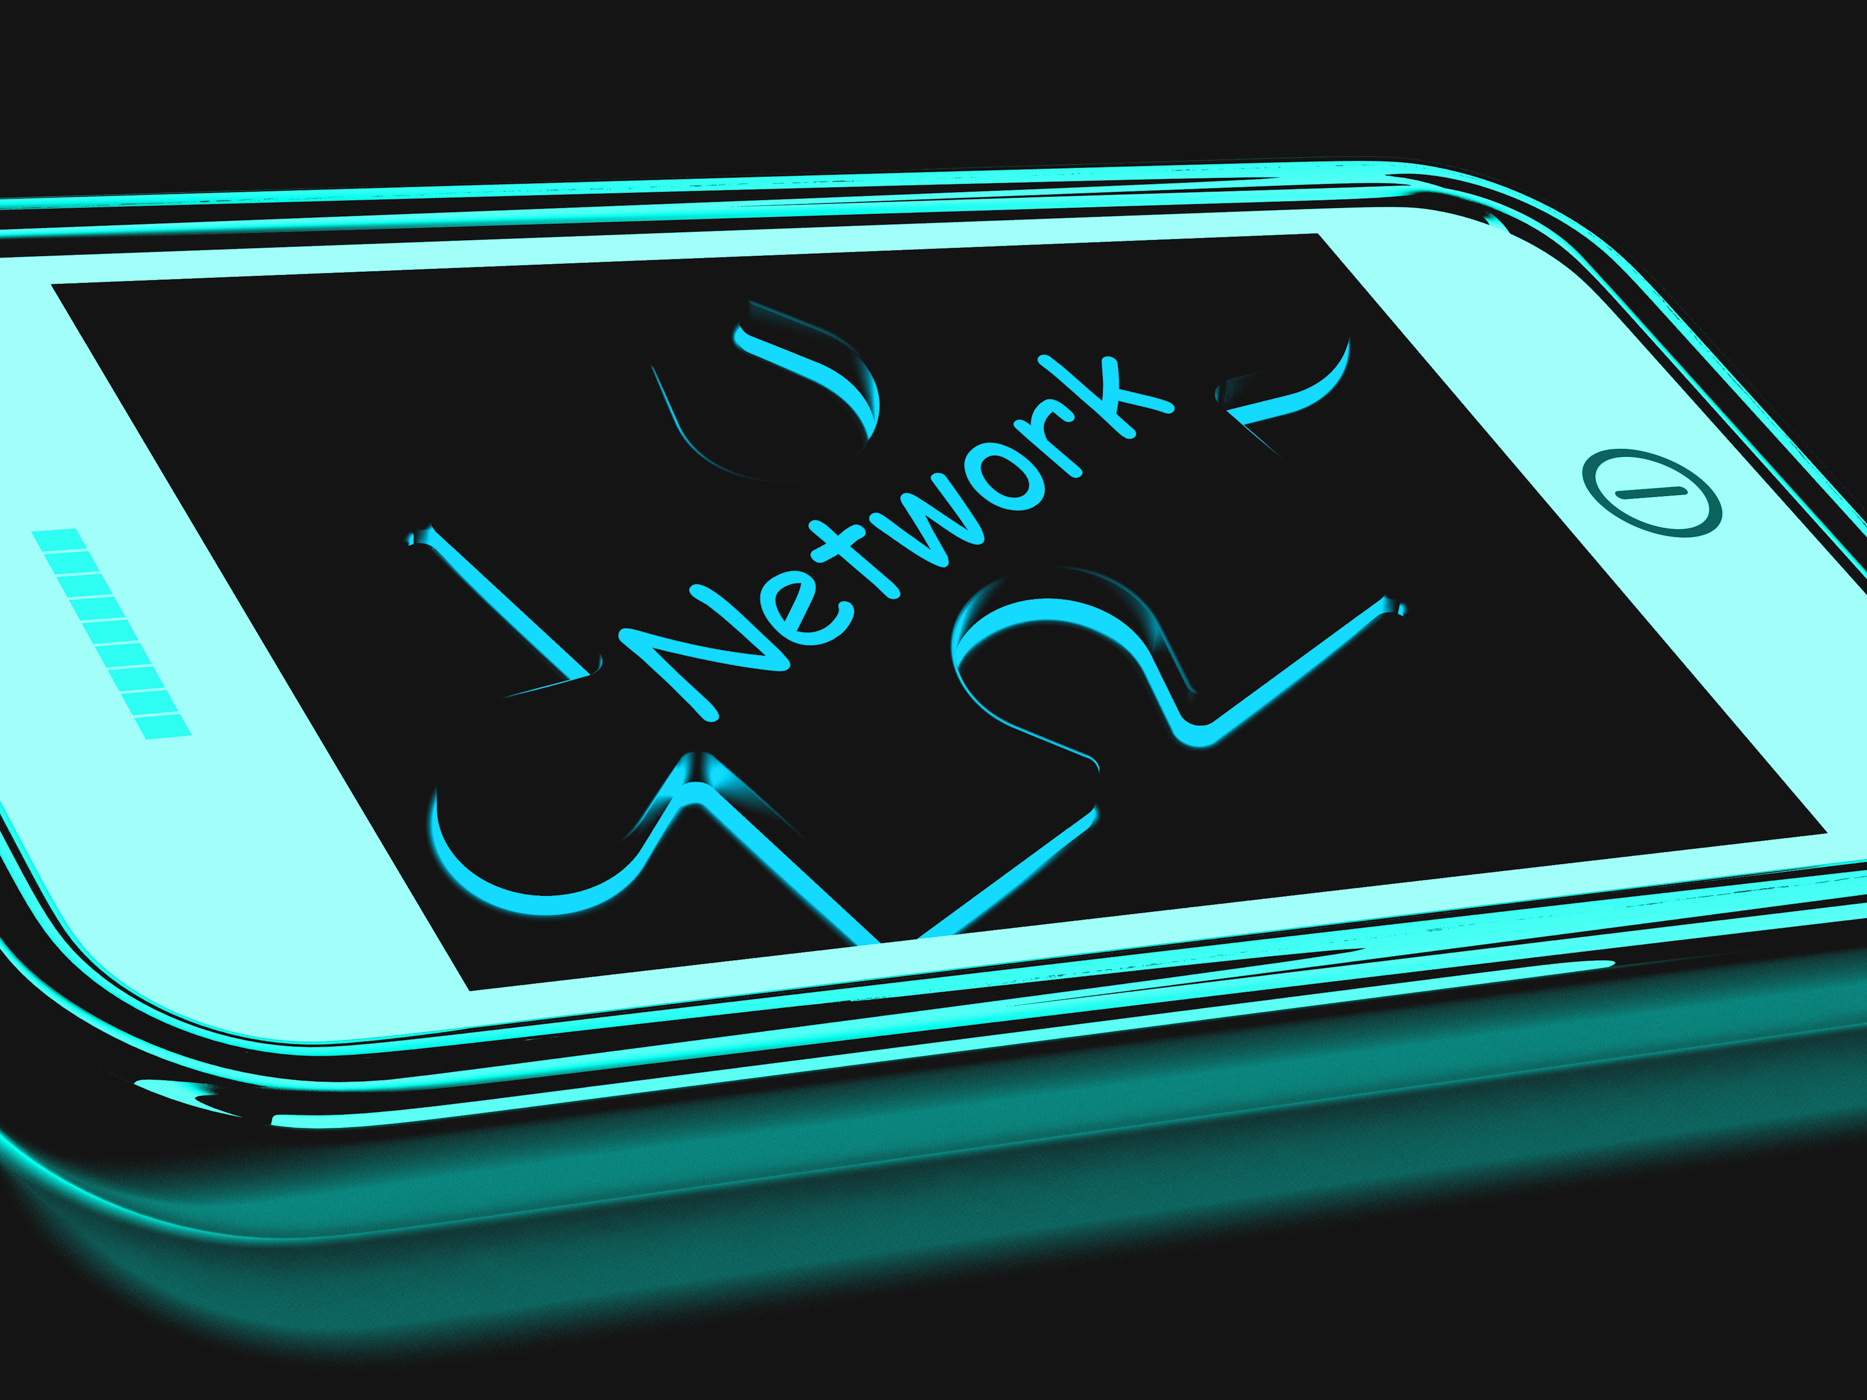 Network smartphone shows connecting and communicating on web photo